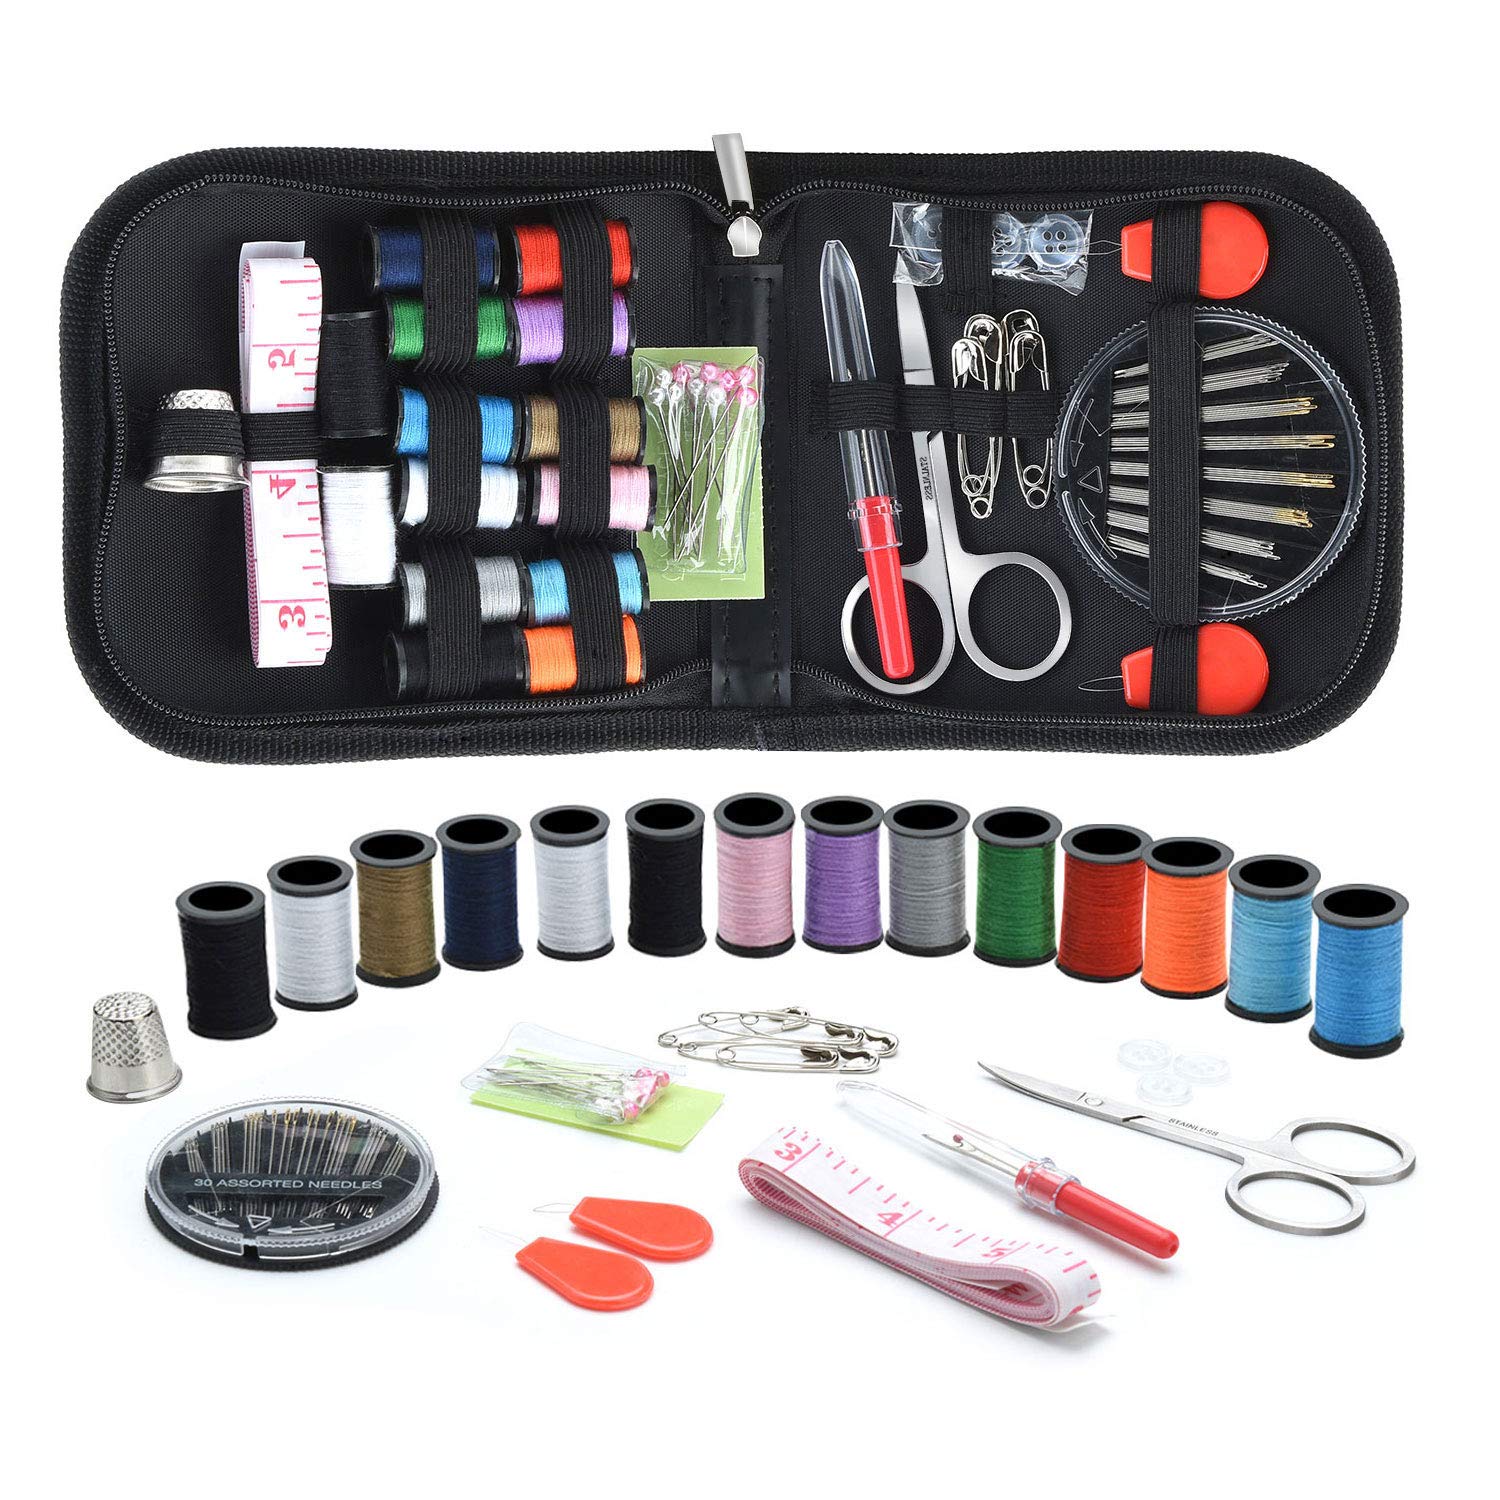 Marcoon Sewing KIT, DIY Sewing Supplies with Sewing Accessories